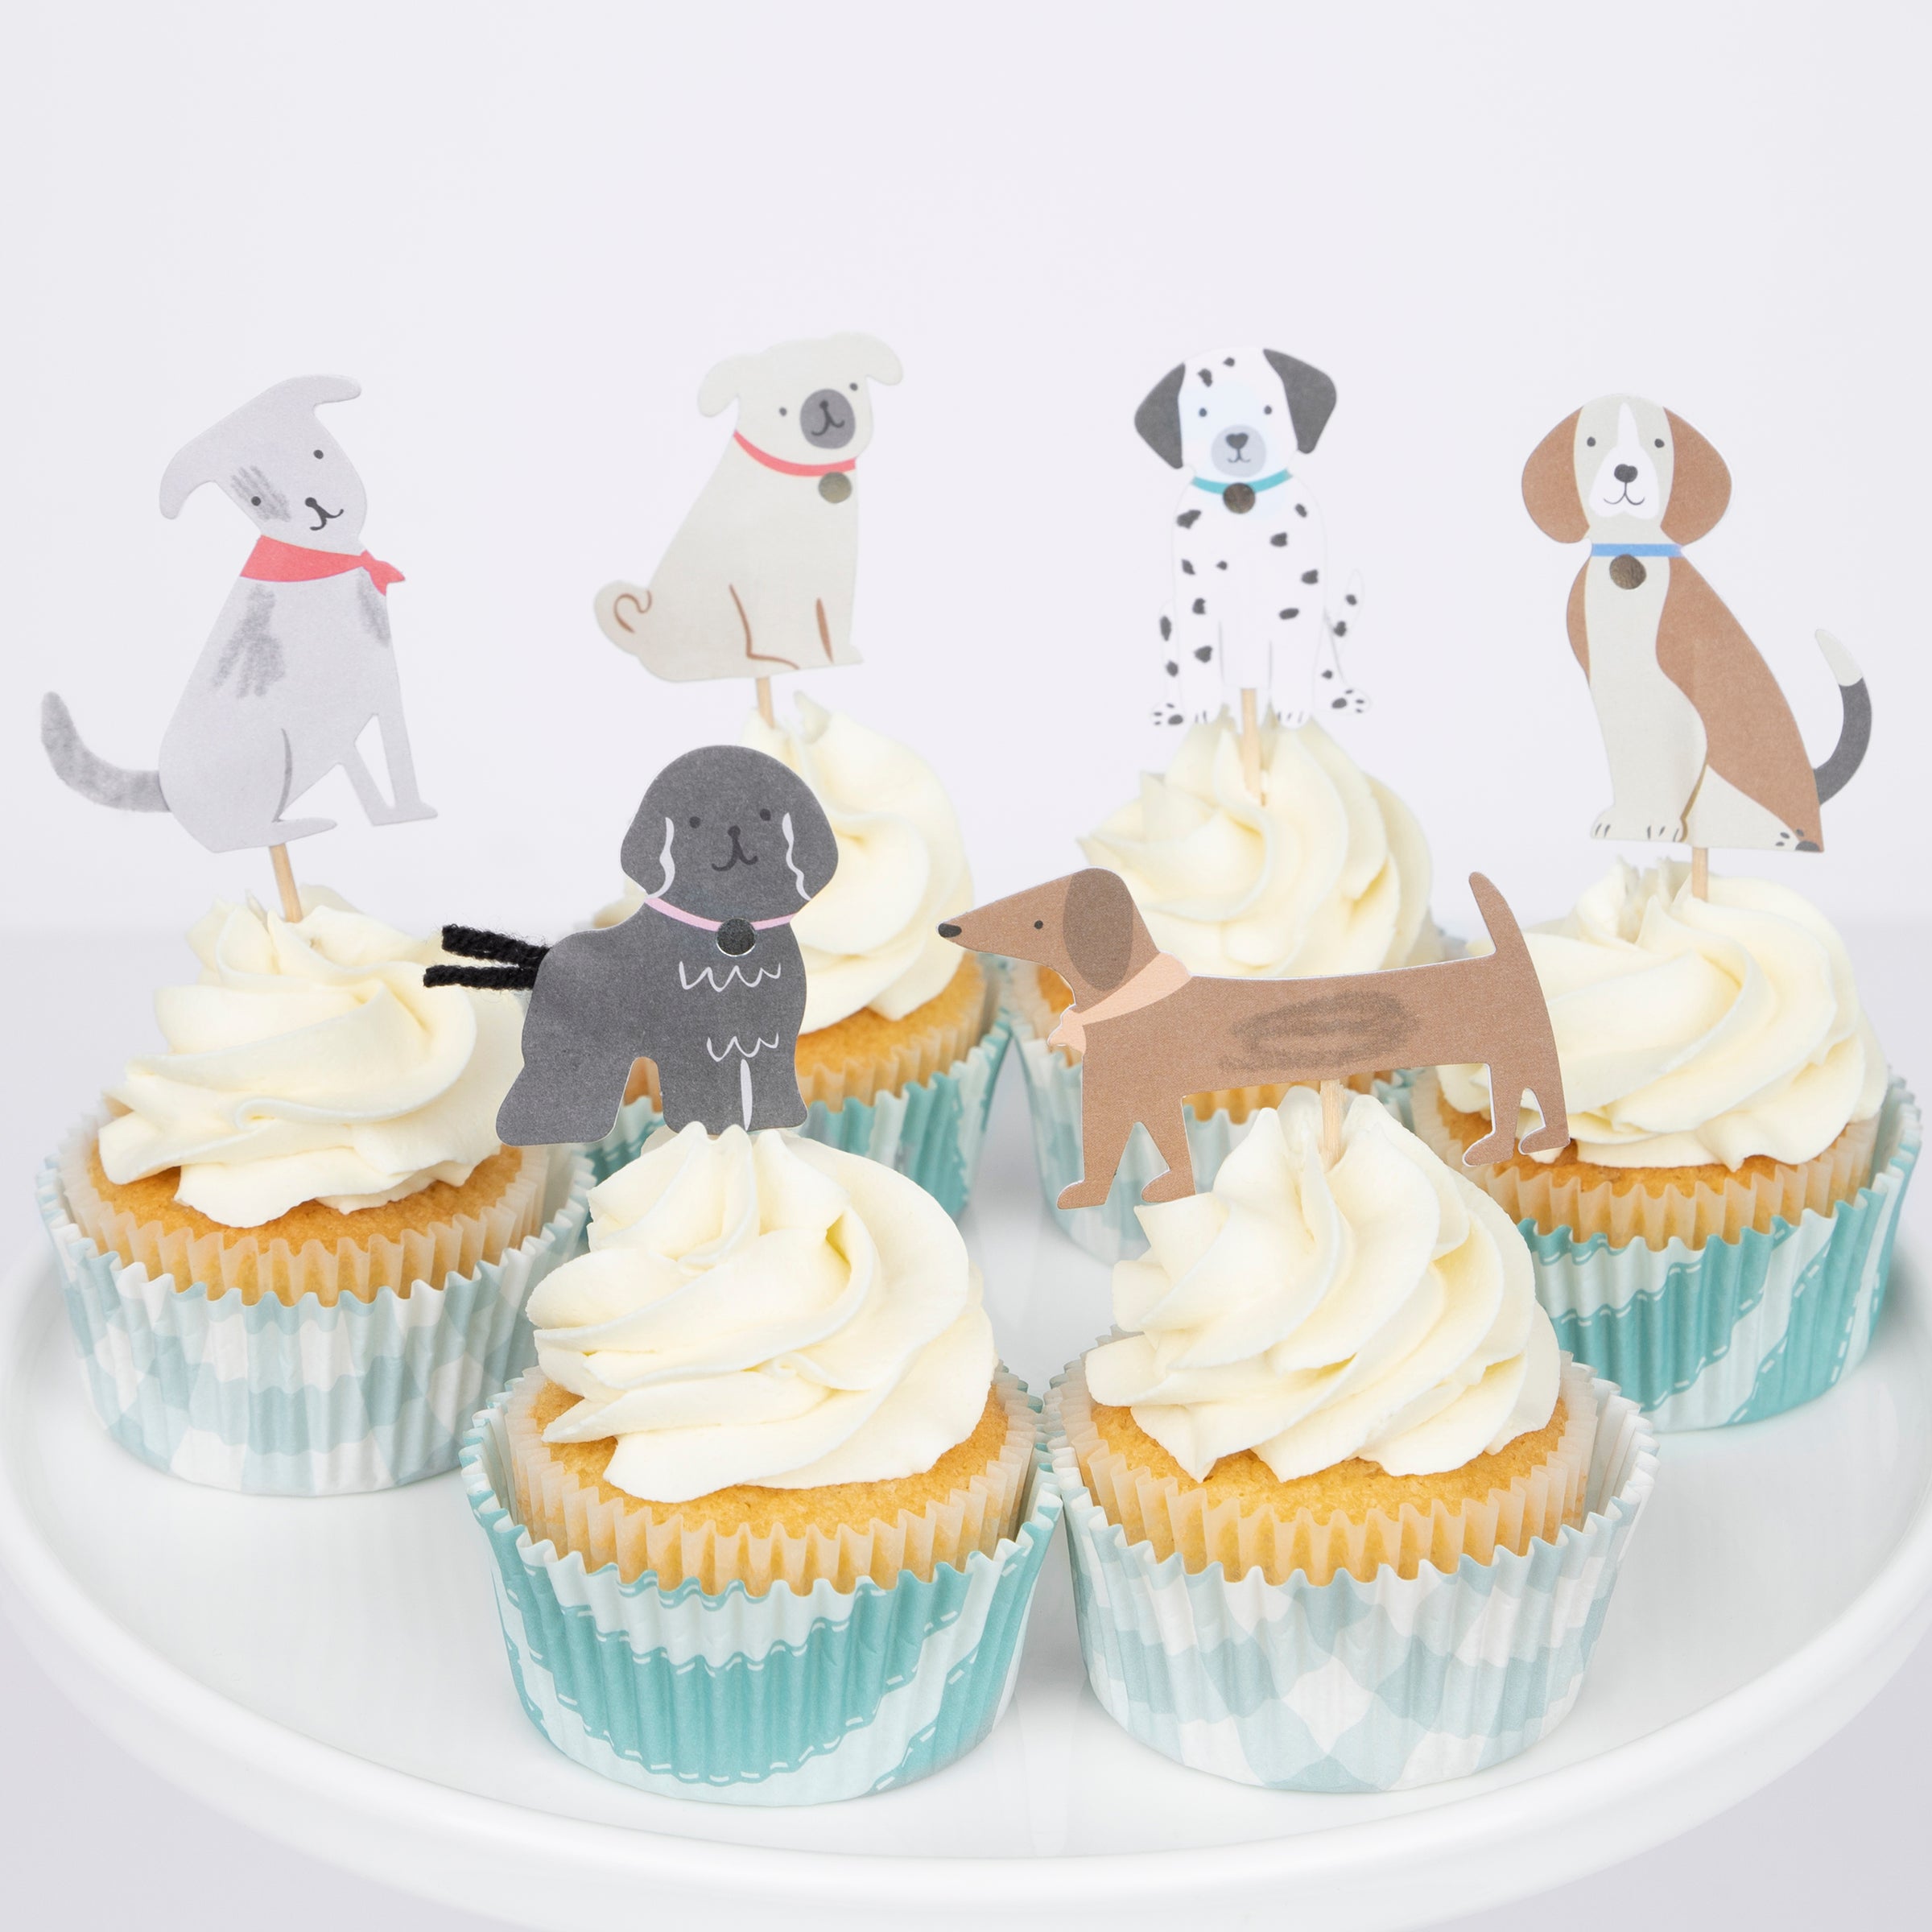 Our special cupcake toppers and cupcake cases are perfect to create birthday cupcakes for a dog birthday party.